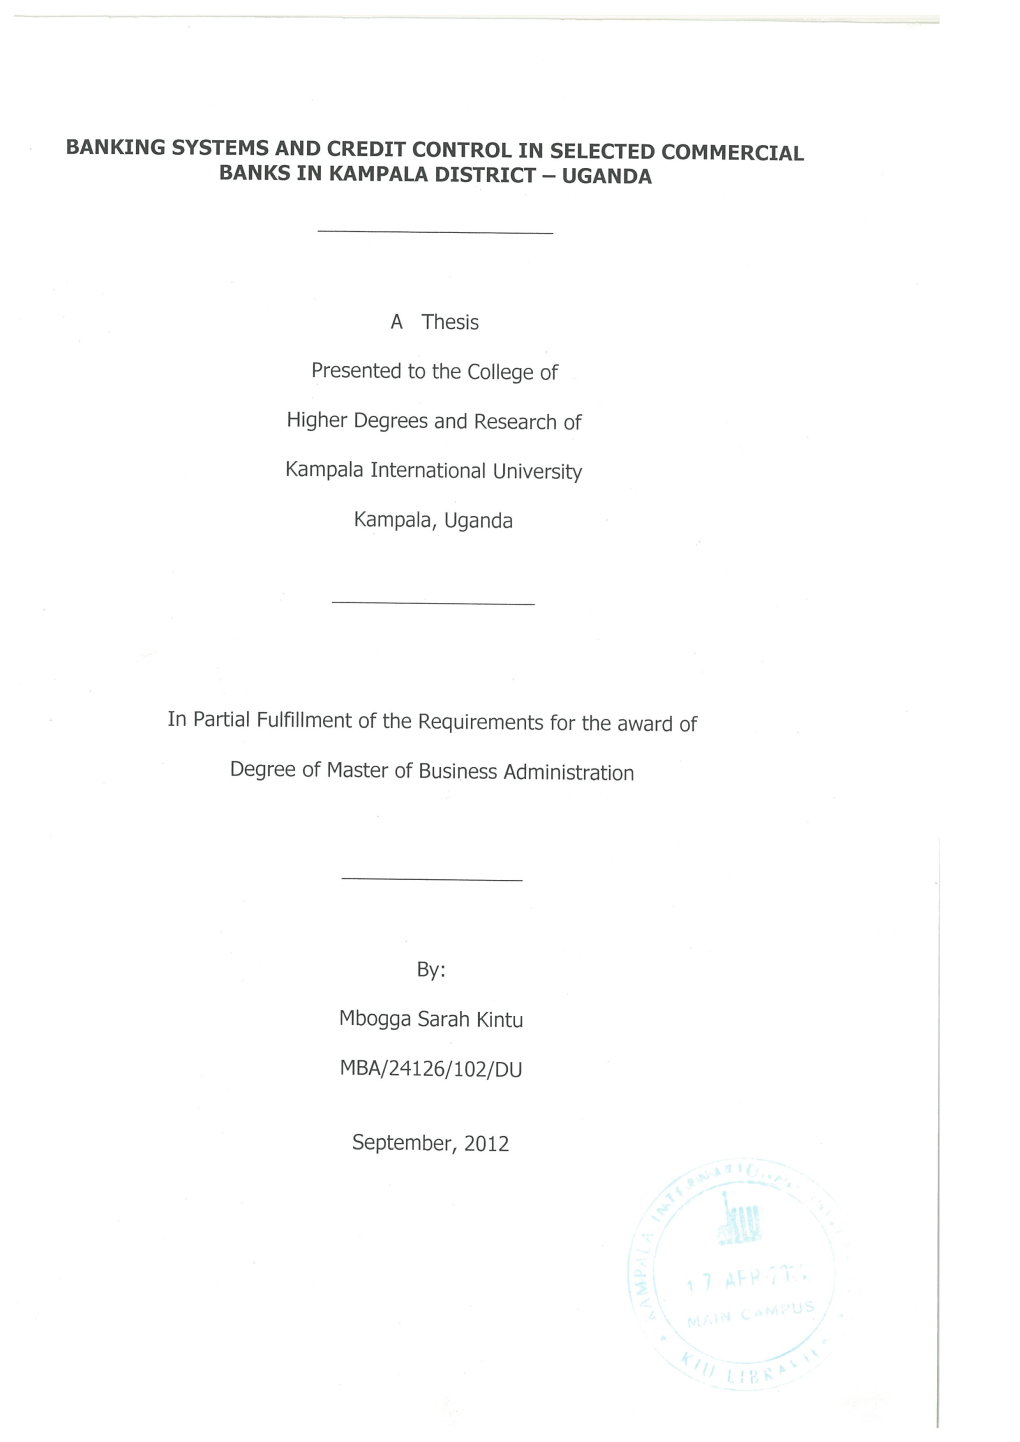 A Thesis Presented to the College of Higher Degrees and Research of Kampala International University Kampala, Uganda in Partial